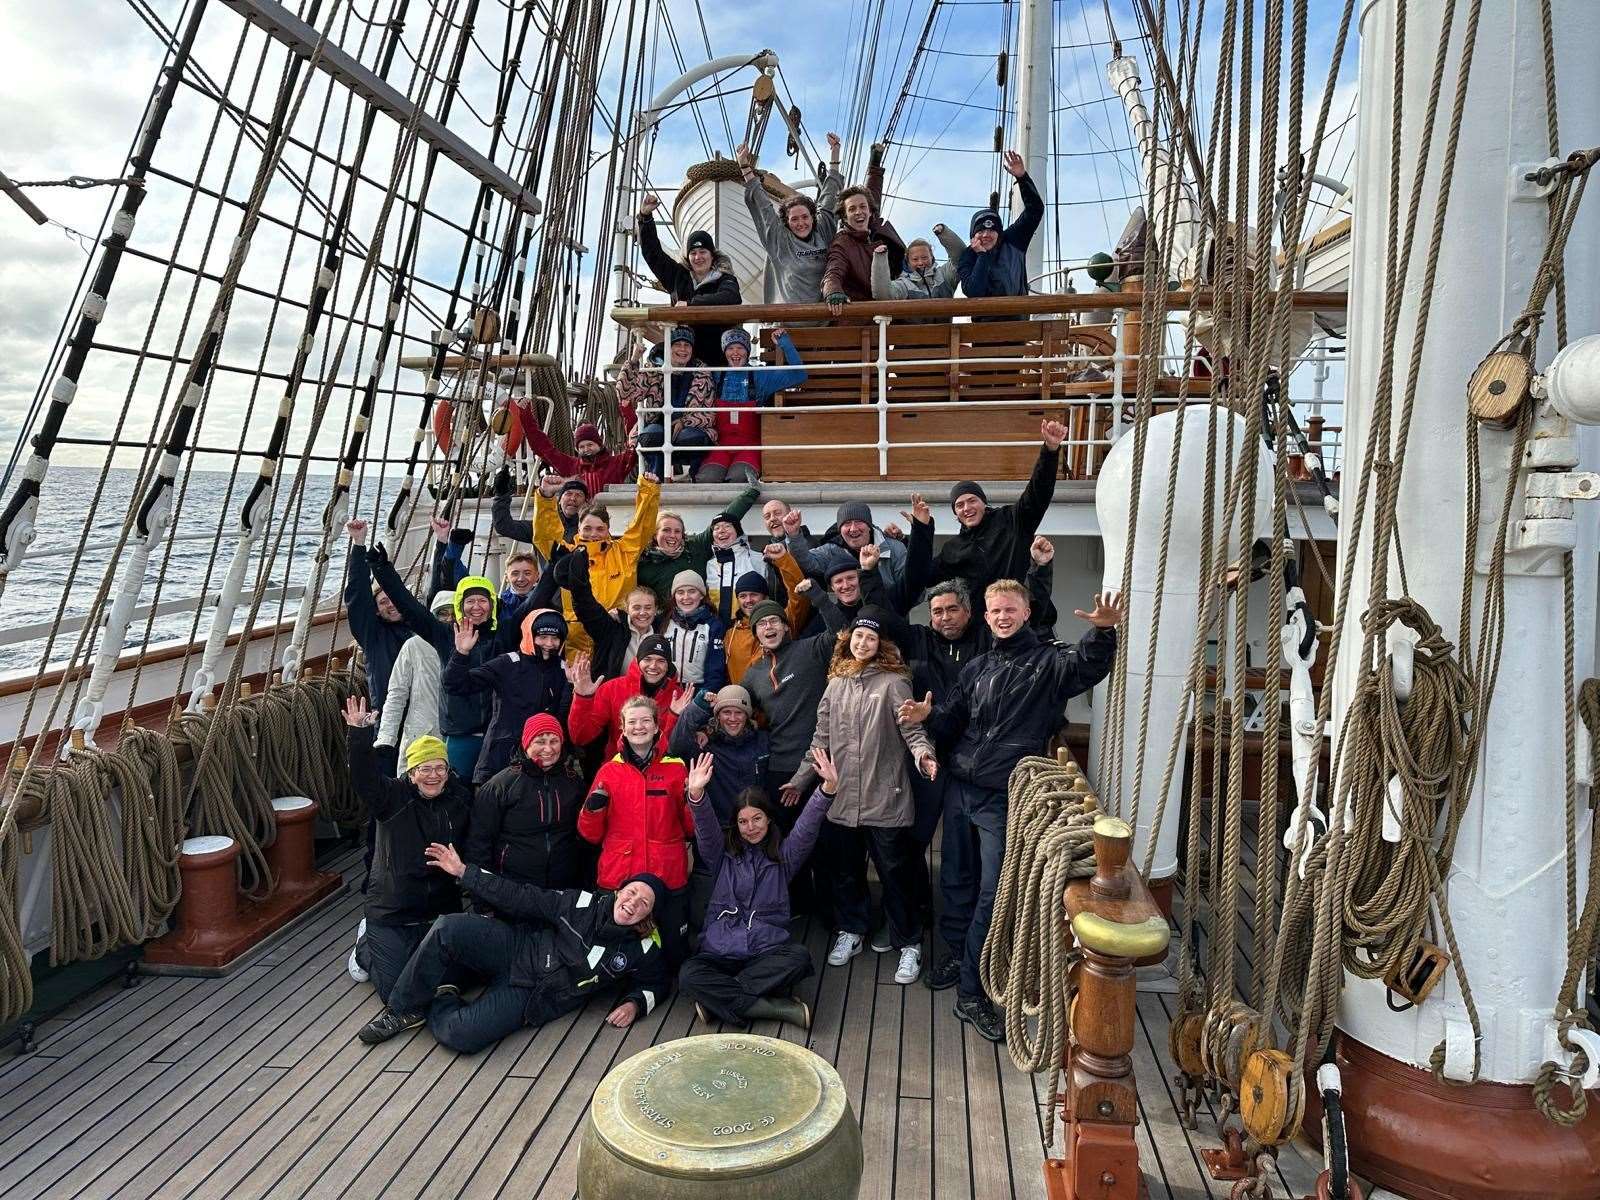 Developing the Young Workforce North Highland helped to arrange a Sail Training event at this year's Tall Ships event.